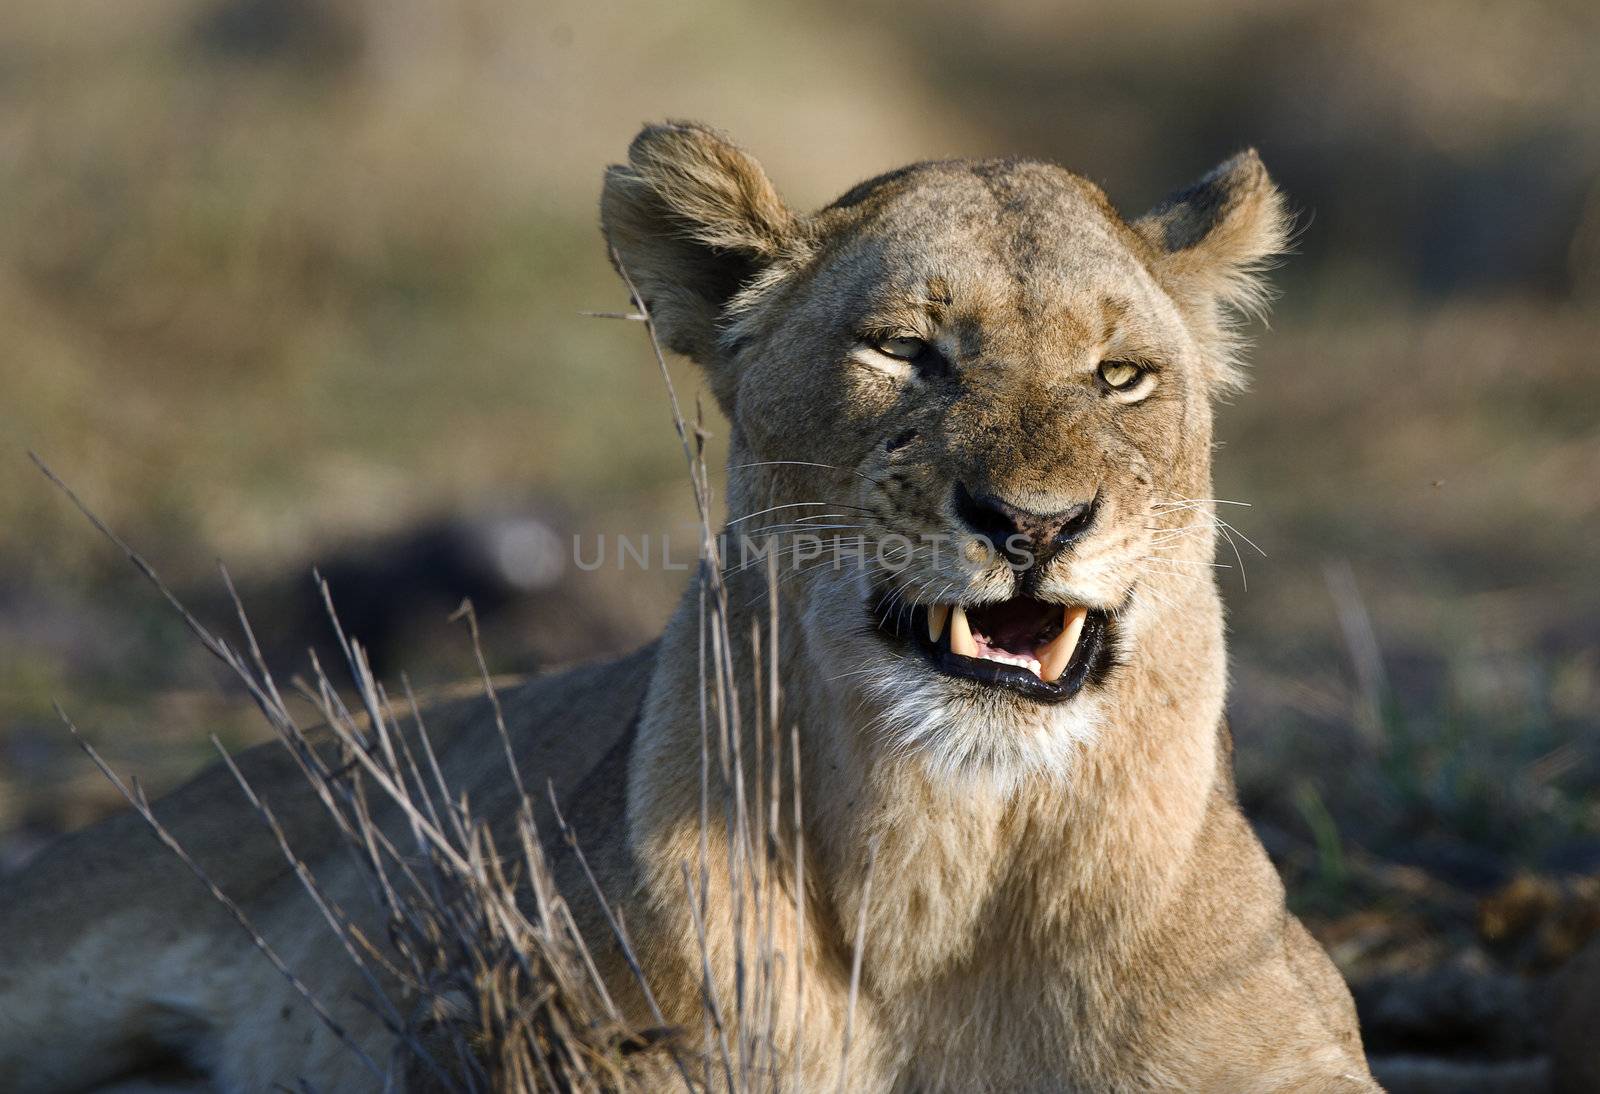 The lioness is angry. by SURZ